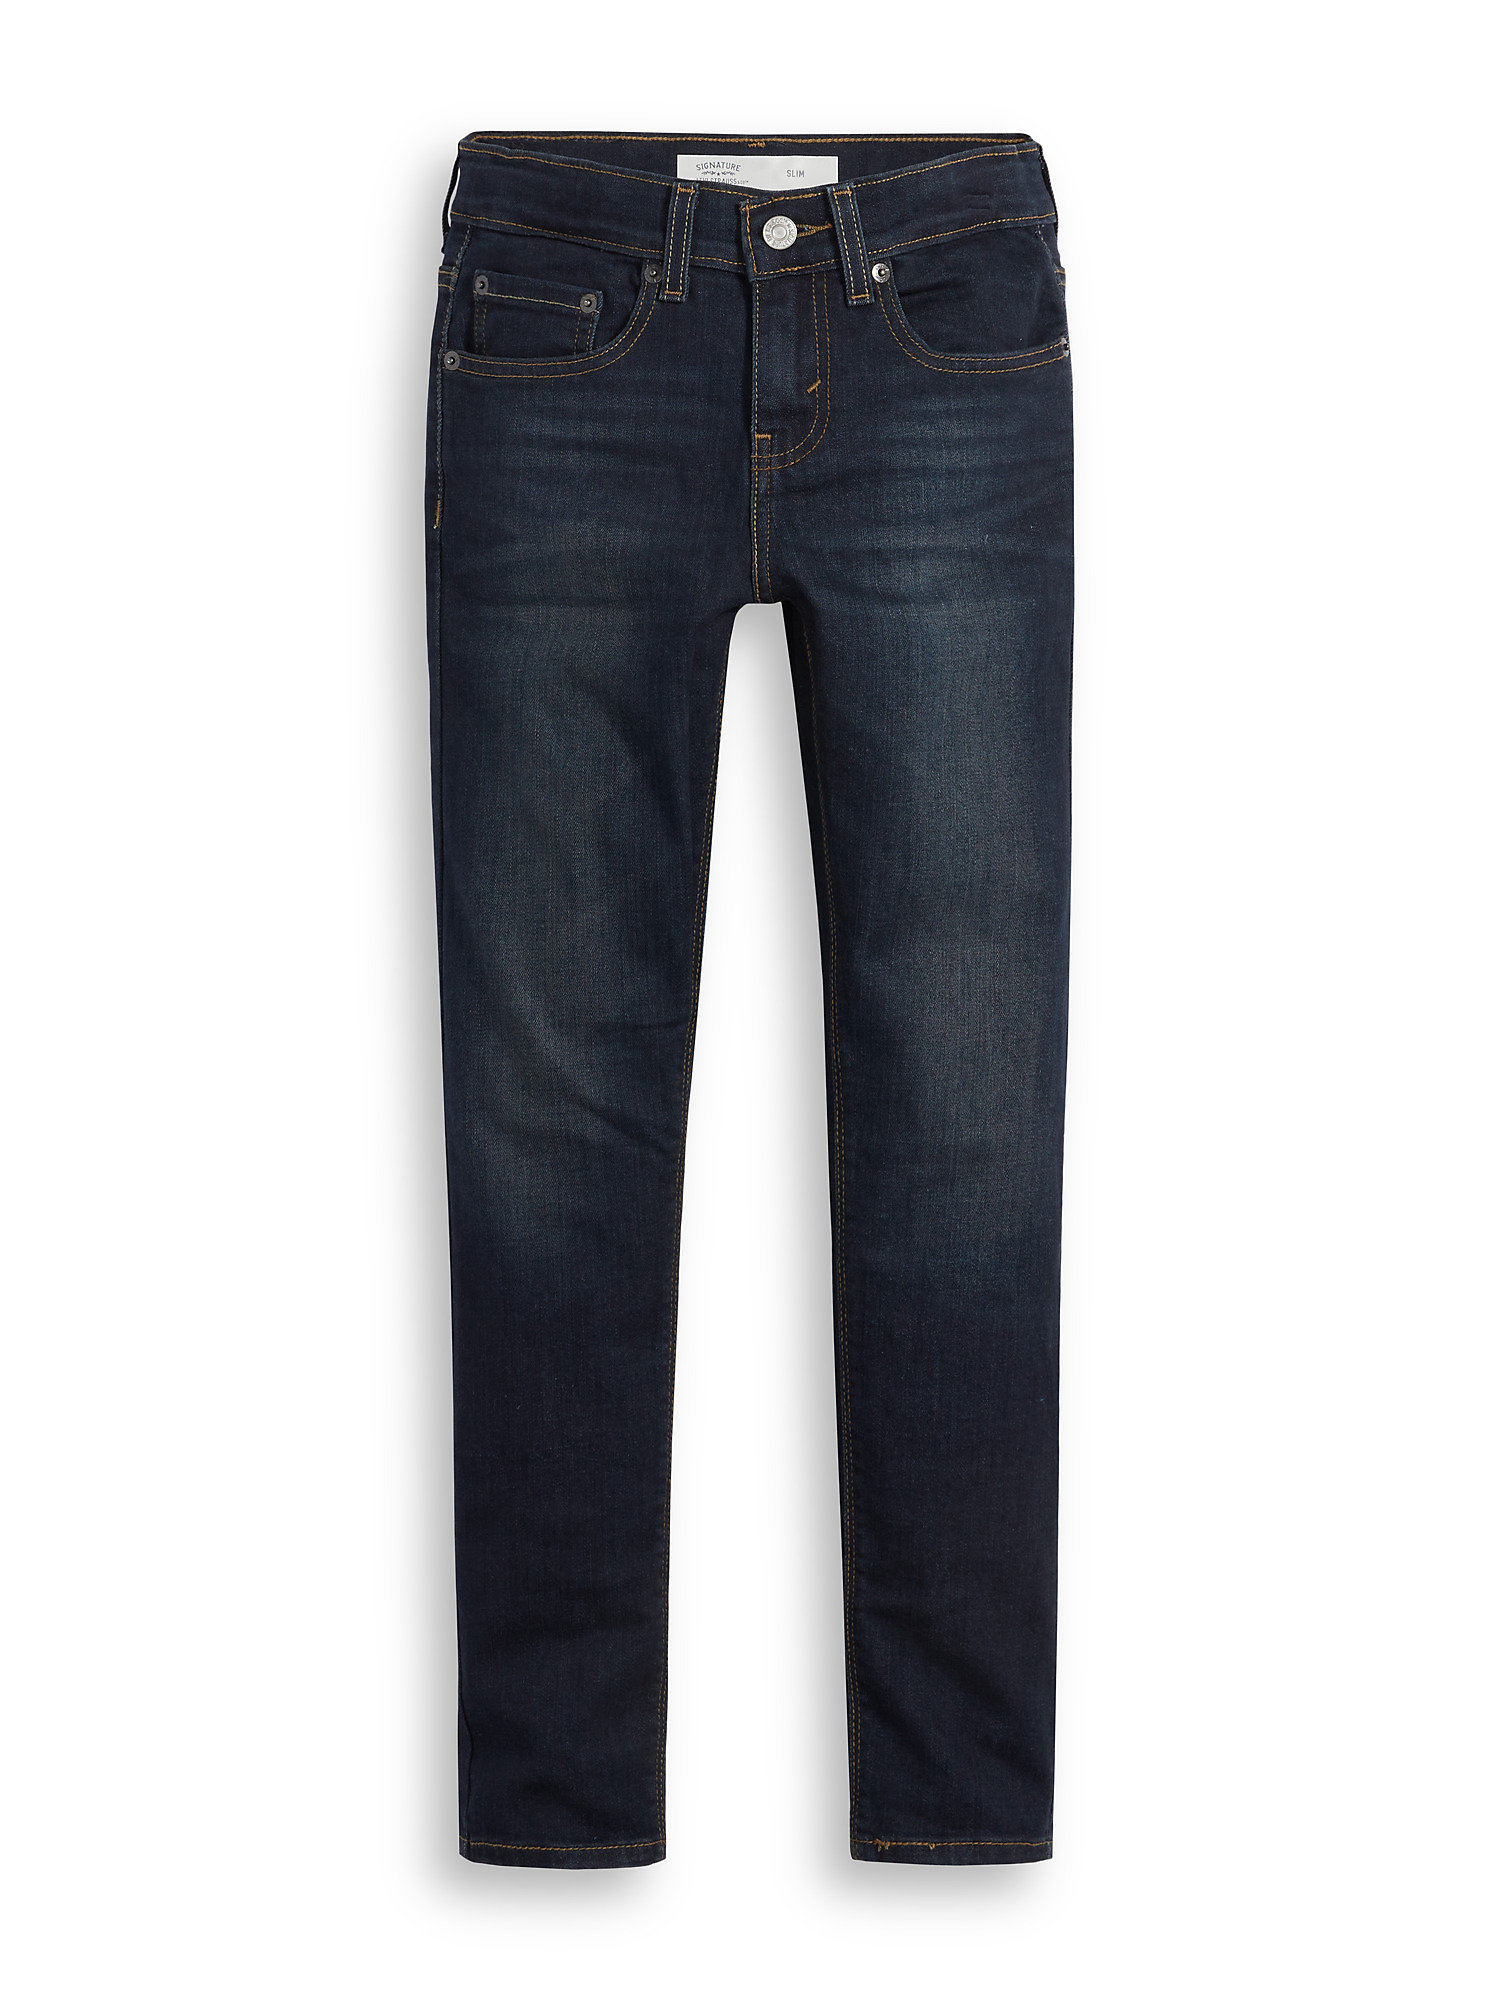 Signature by Levi Strauss & Co. Boys 4-18 Slim Fit Jeans - image 1 of 3